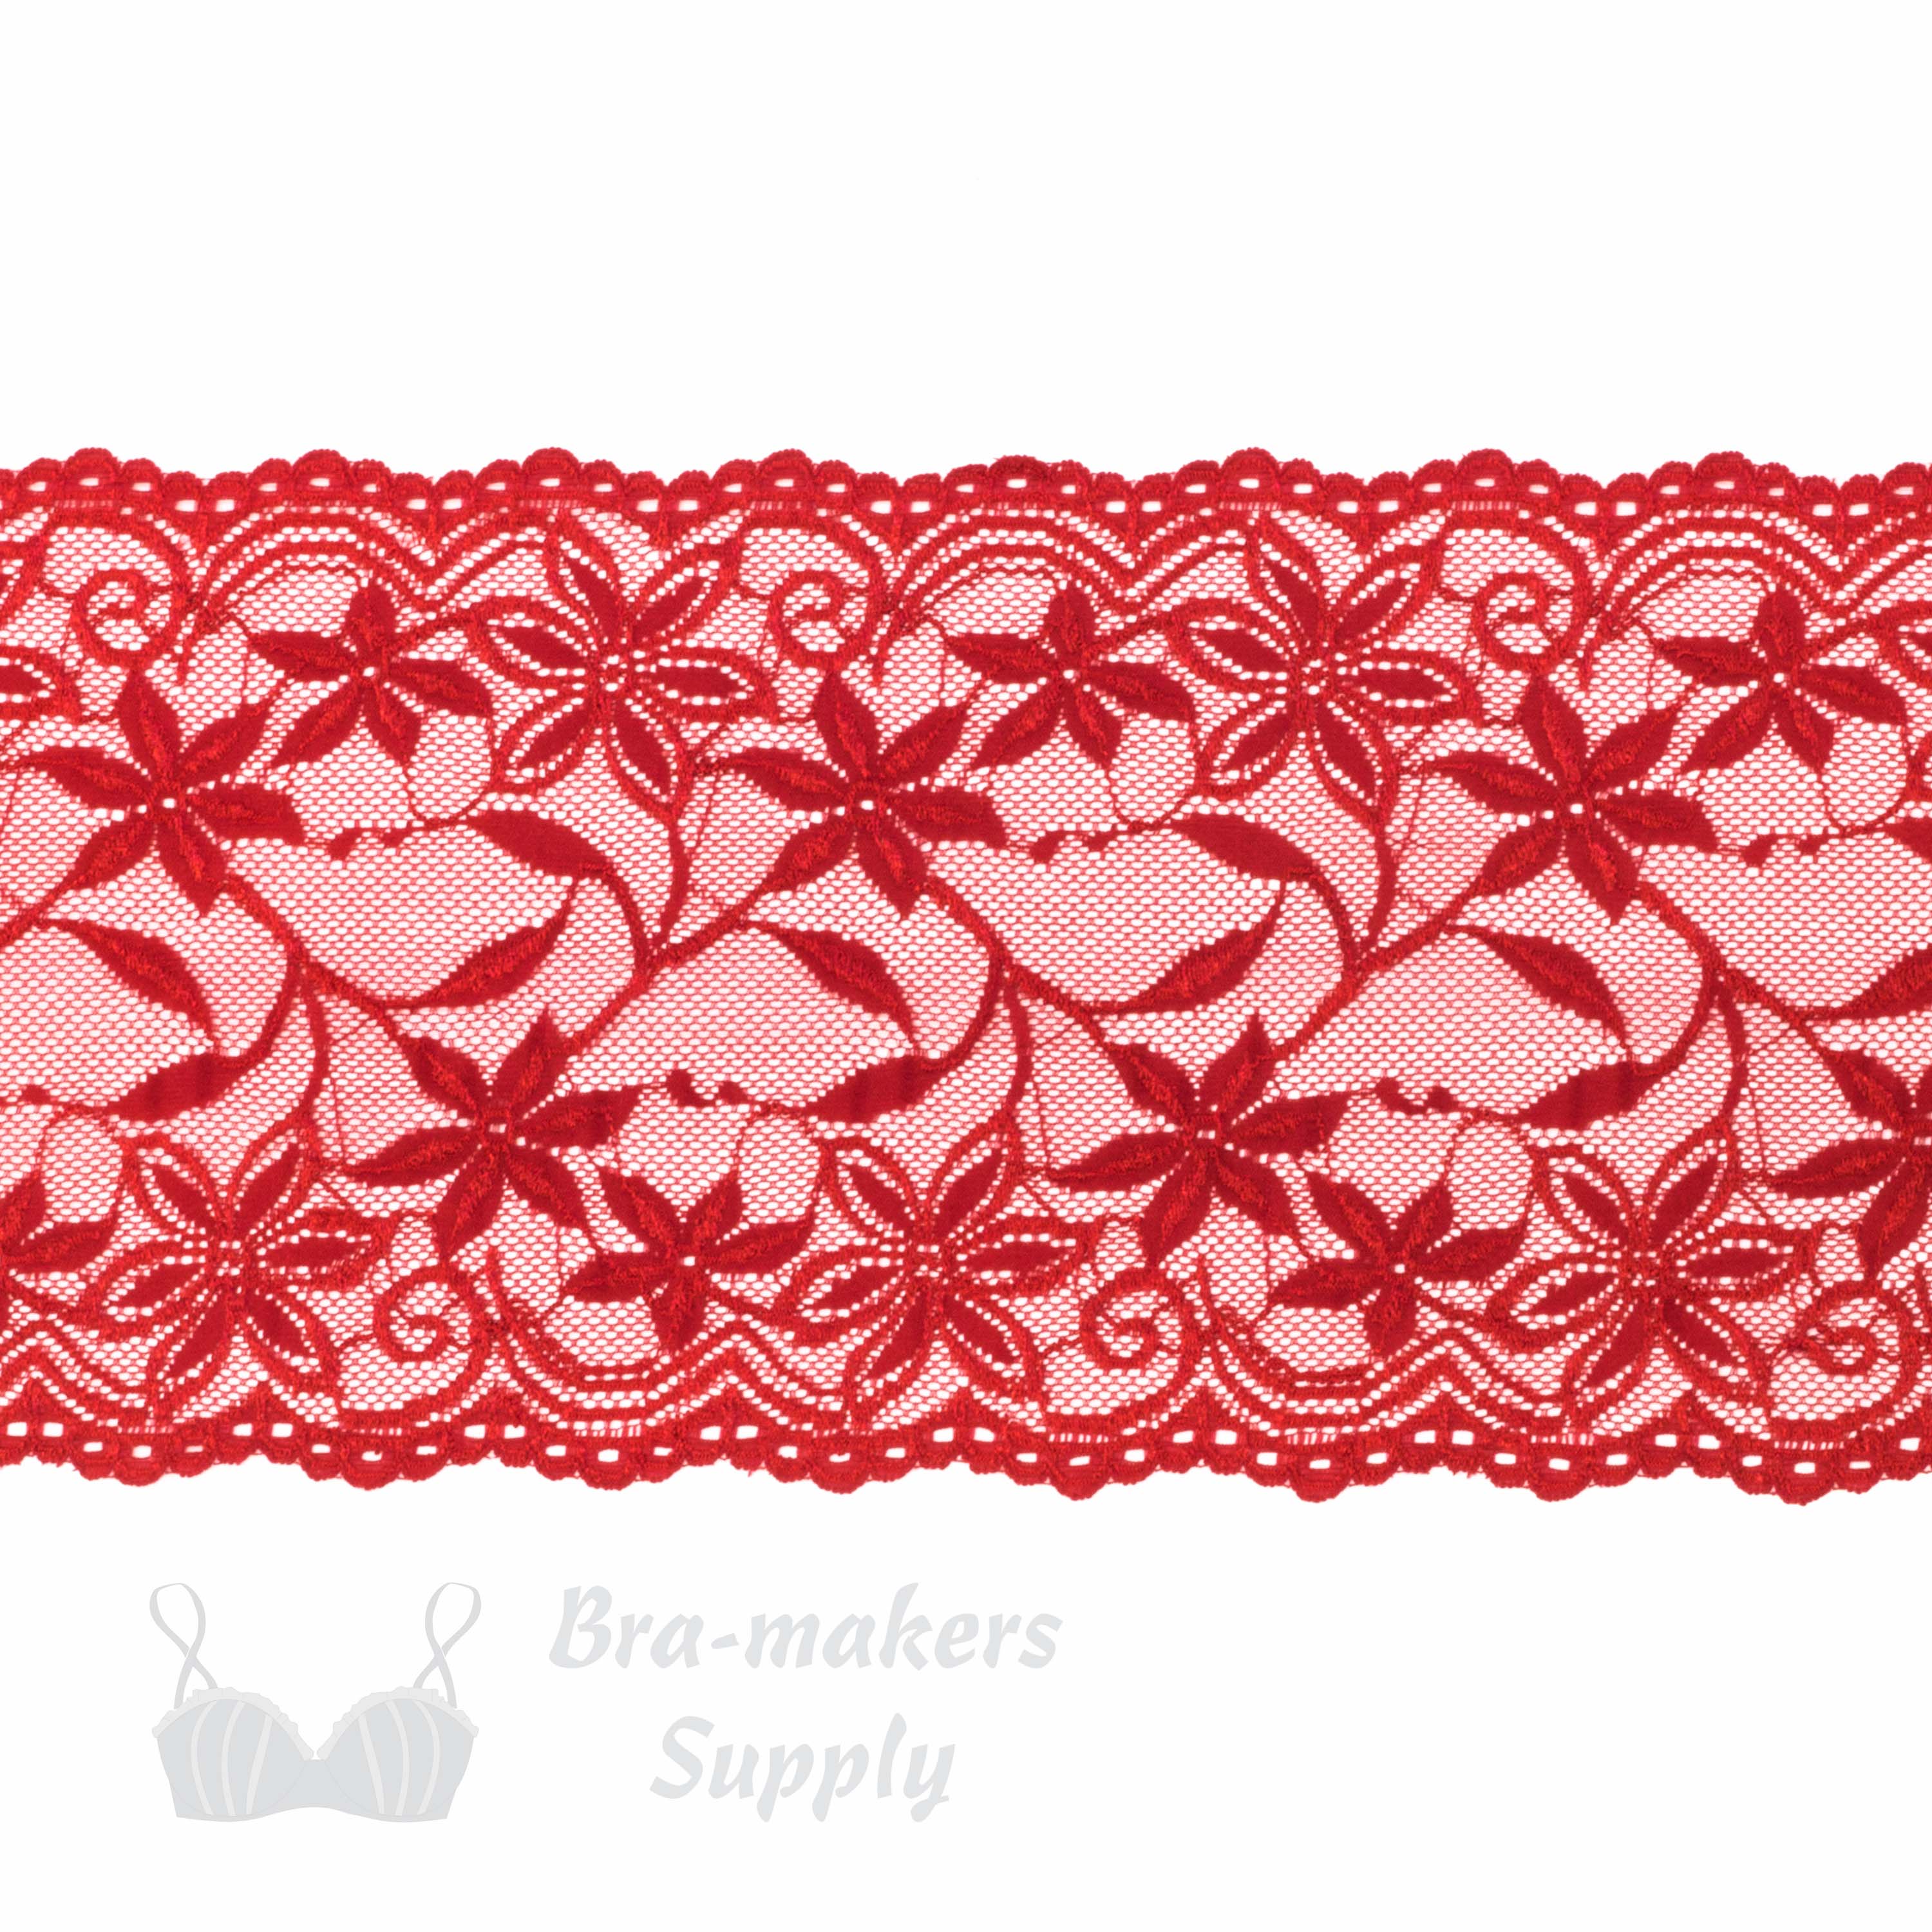 stretch laces - 6 inch - 15 cm six inch red floral stretch lace LS-60 470 from Bra-Makers Supply